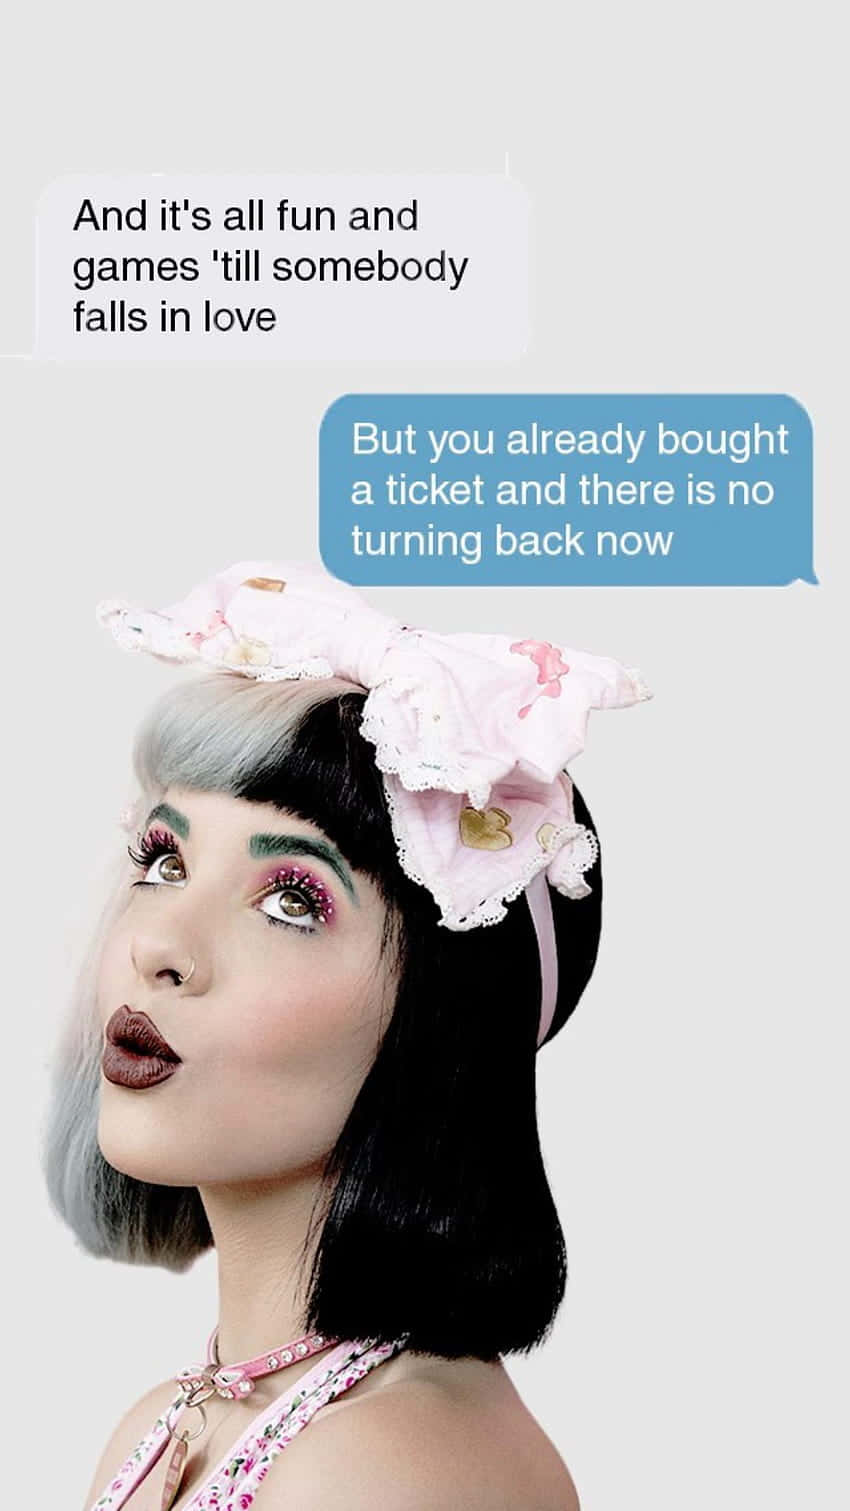 Text: And it's all fun and games 'till somebody falls in love. But you already bought a ticket and there is no turning back now. - Melanie Martinez